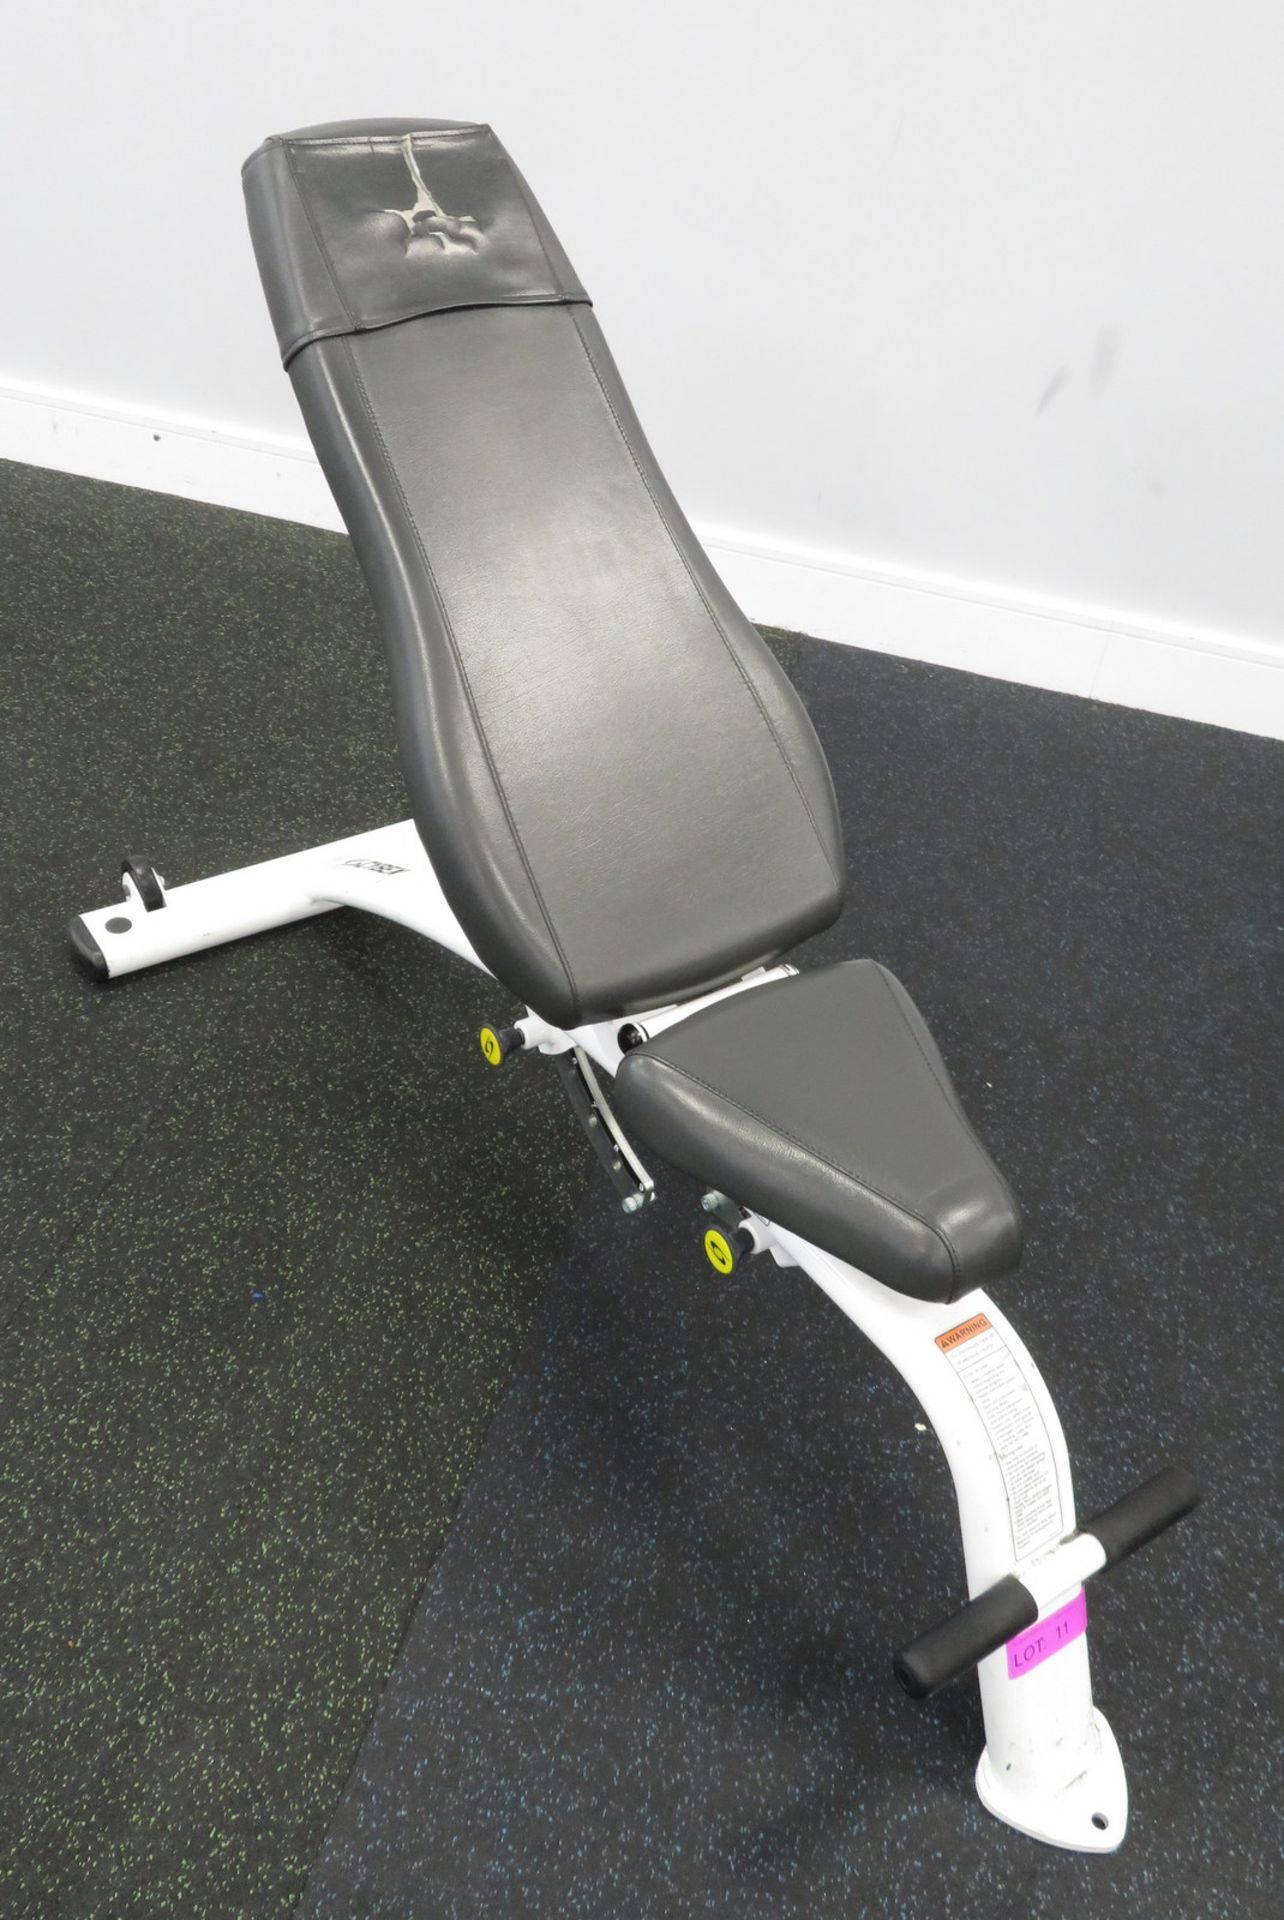 Cybex Adjustable Bench (Free-standing)1600 Dimensions: 63x140x45cm (LxDxH) - Image 3 of 8